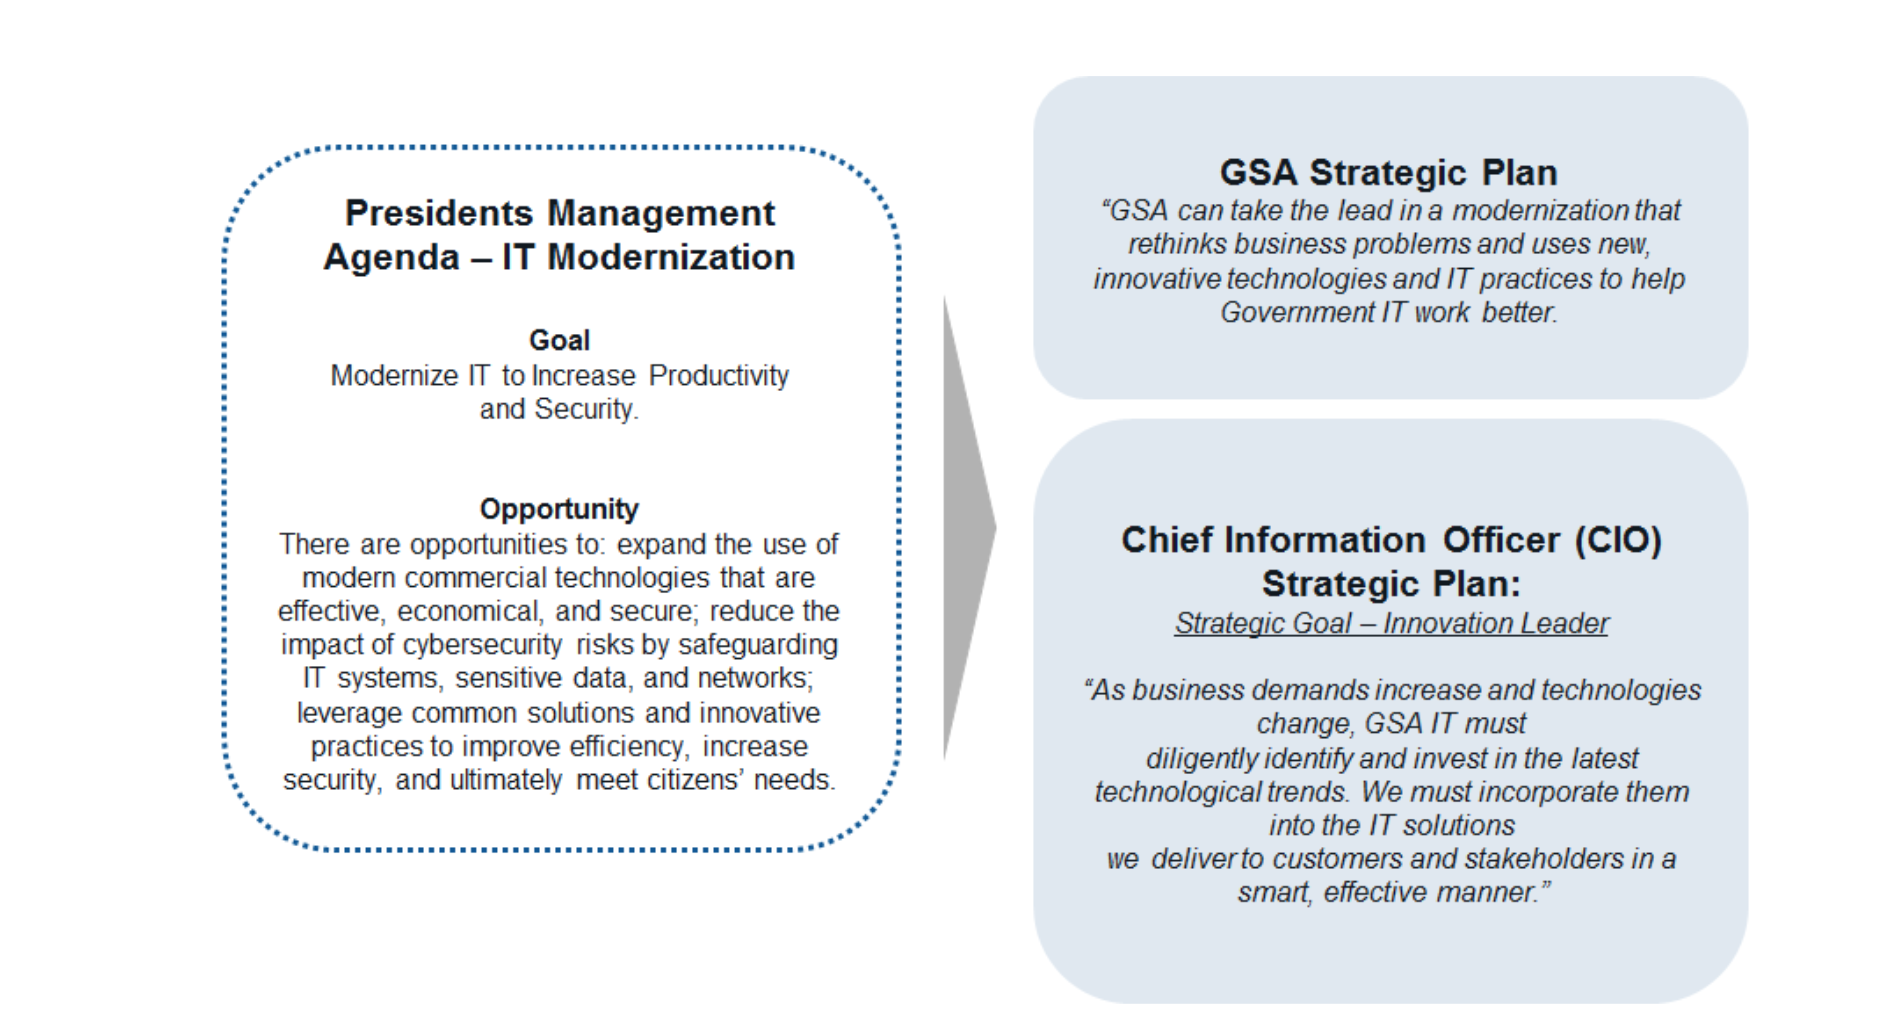 Diagram showing the President&rsquo;s Management Agenda for IT Modernization feeding into the GSA Strategic Plan and the CIO Strategic Plan. The President&rsquo;s Management Agenda lists a goal and an opportunity. The goal is &ldquo;Modernize IT to increase productivity and security&rdquo;. The opportunity is &ldquo;There are opportunities to: expand the use of modern commercial technologies that are effective, economical, and secure; reduce the impact of cybersecurity risks by safeguarding IT systems, sensitive data, and networks; leverage common solutions and innovative practices to improve efficiency, increase security, and ultimately meet citizens&rsquo; needs.&rdquo;